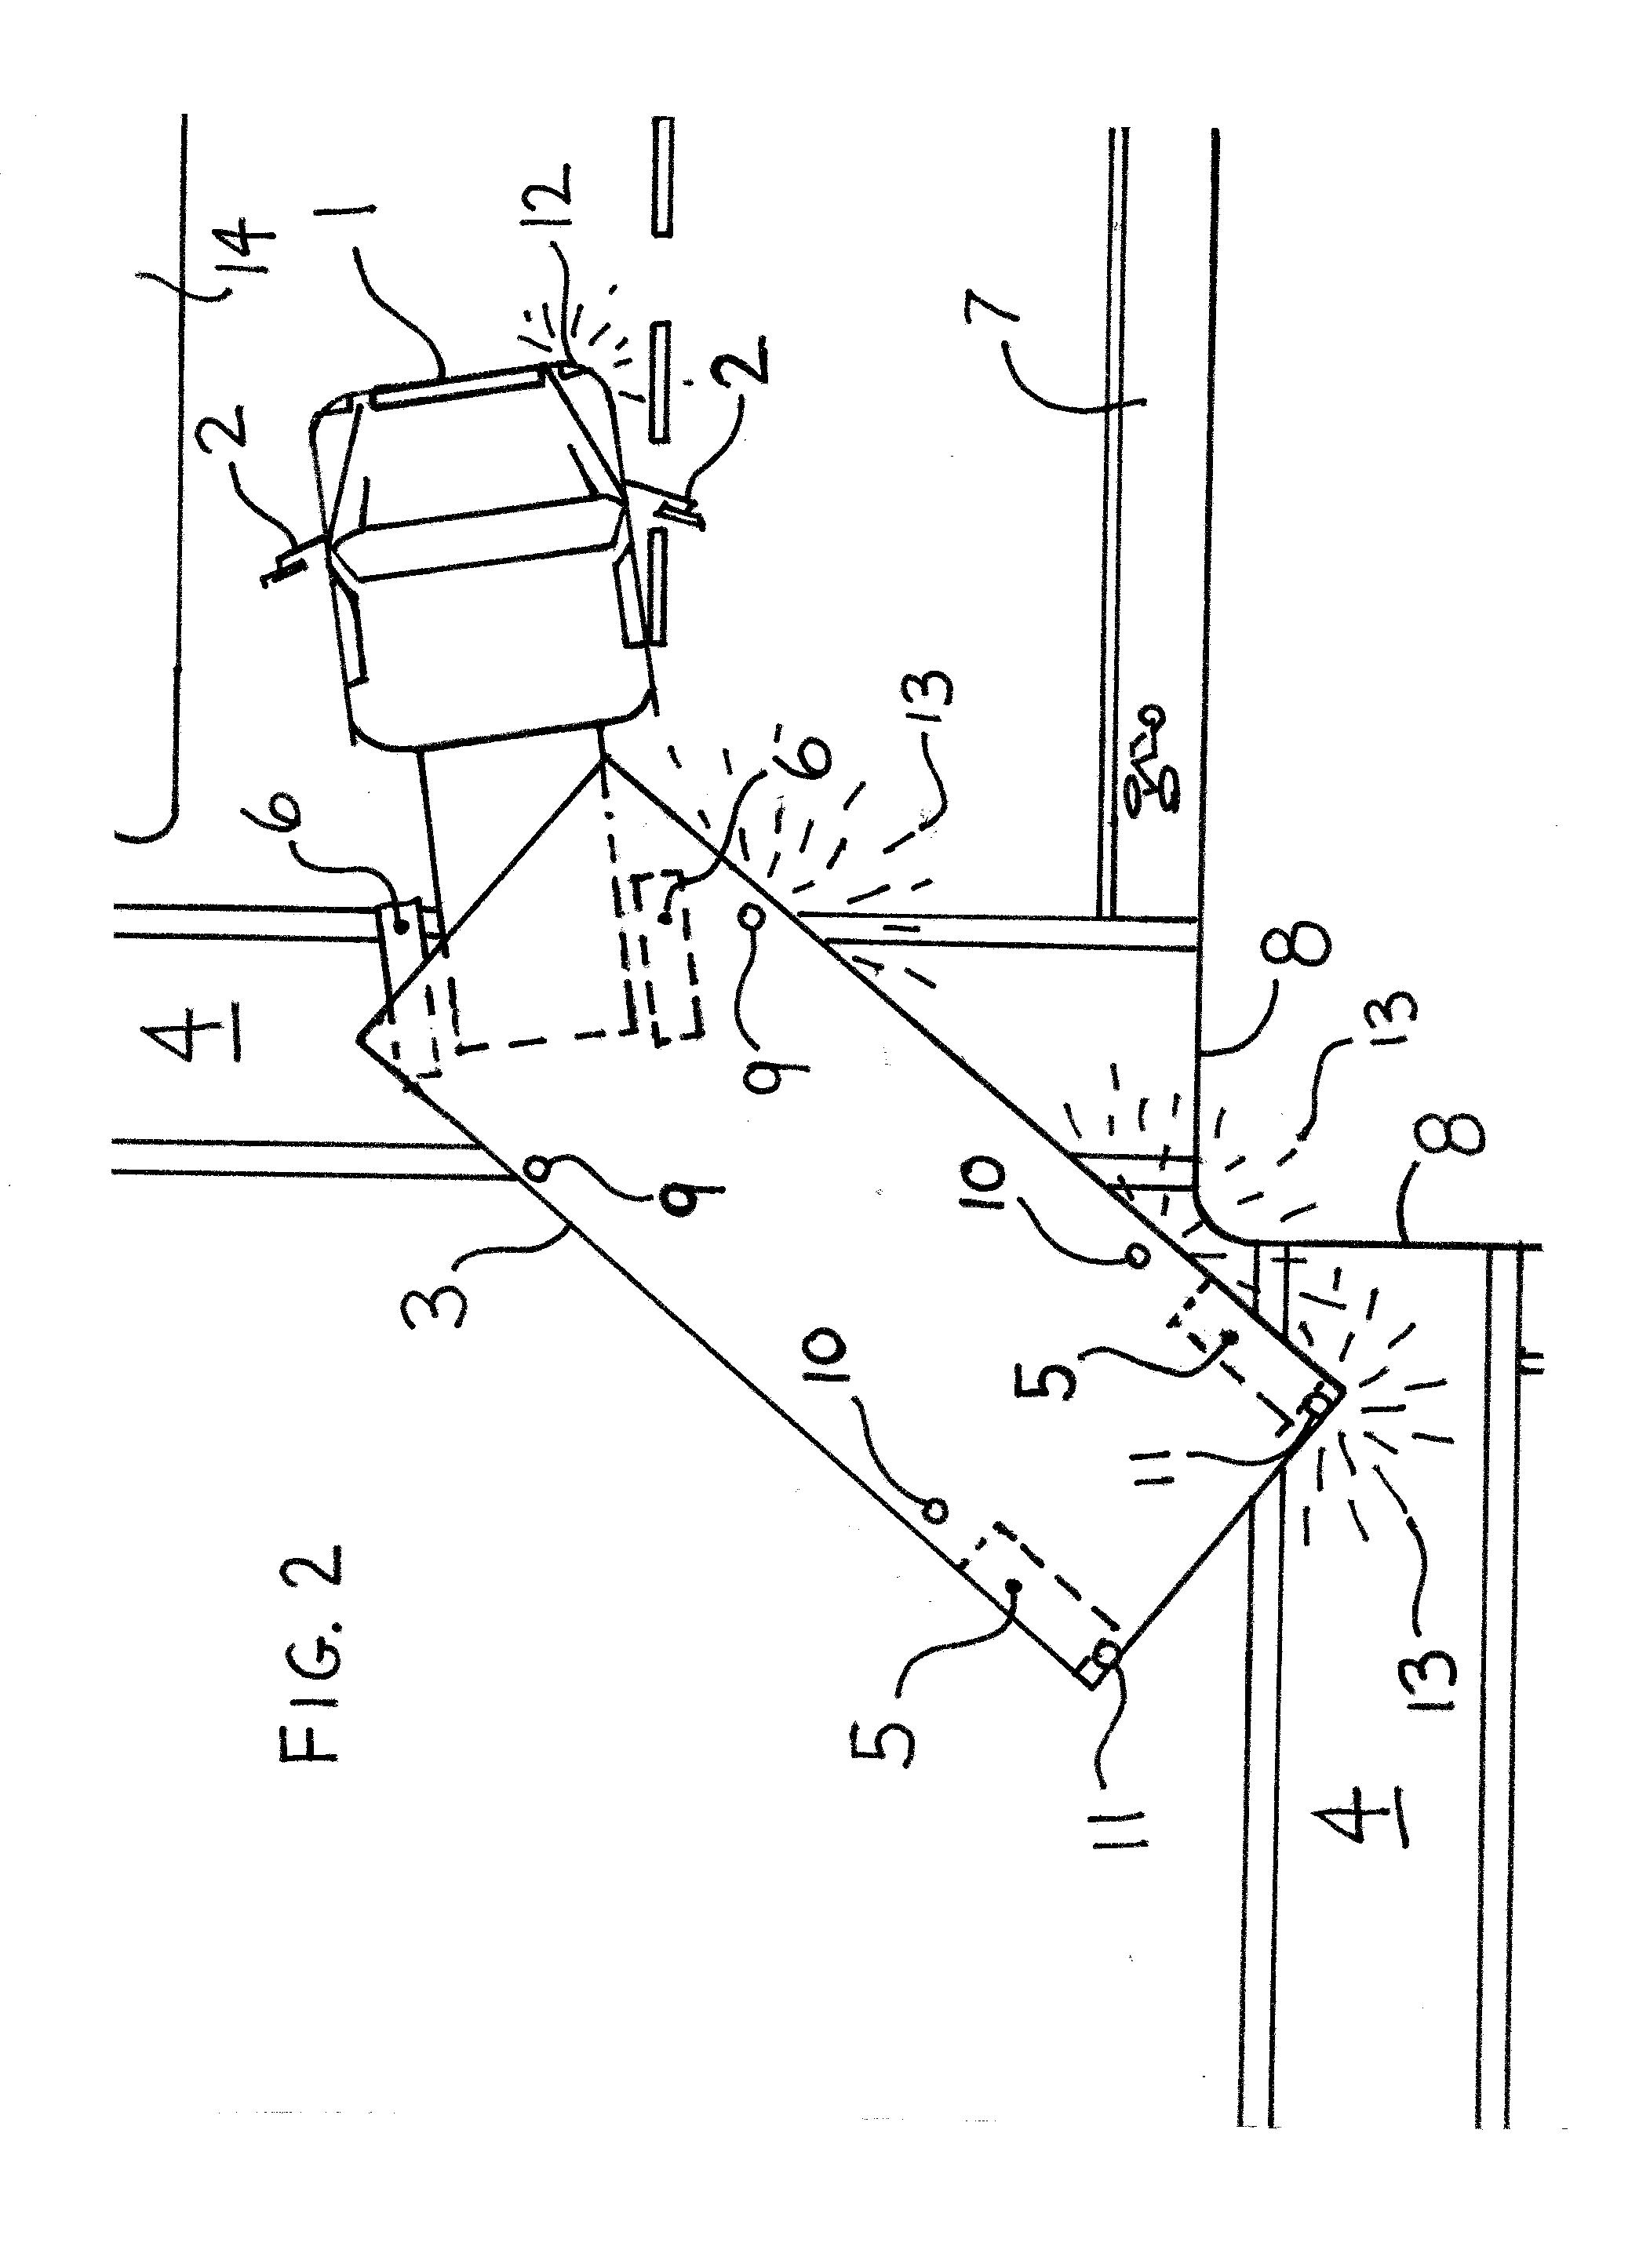 Position and pathway lighting system for a vehicle or combination of vehicles sides undersides rear or trailing wheels and rear or trailing body portion